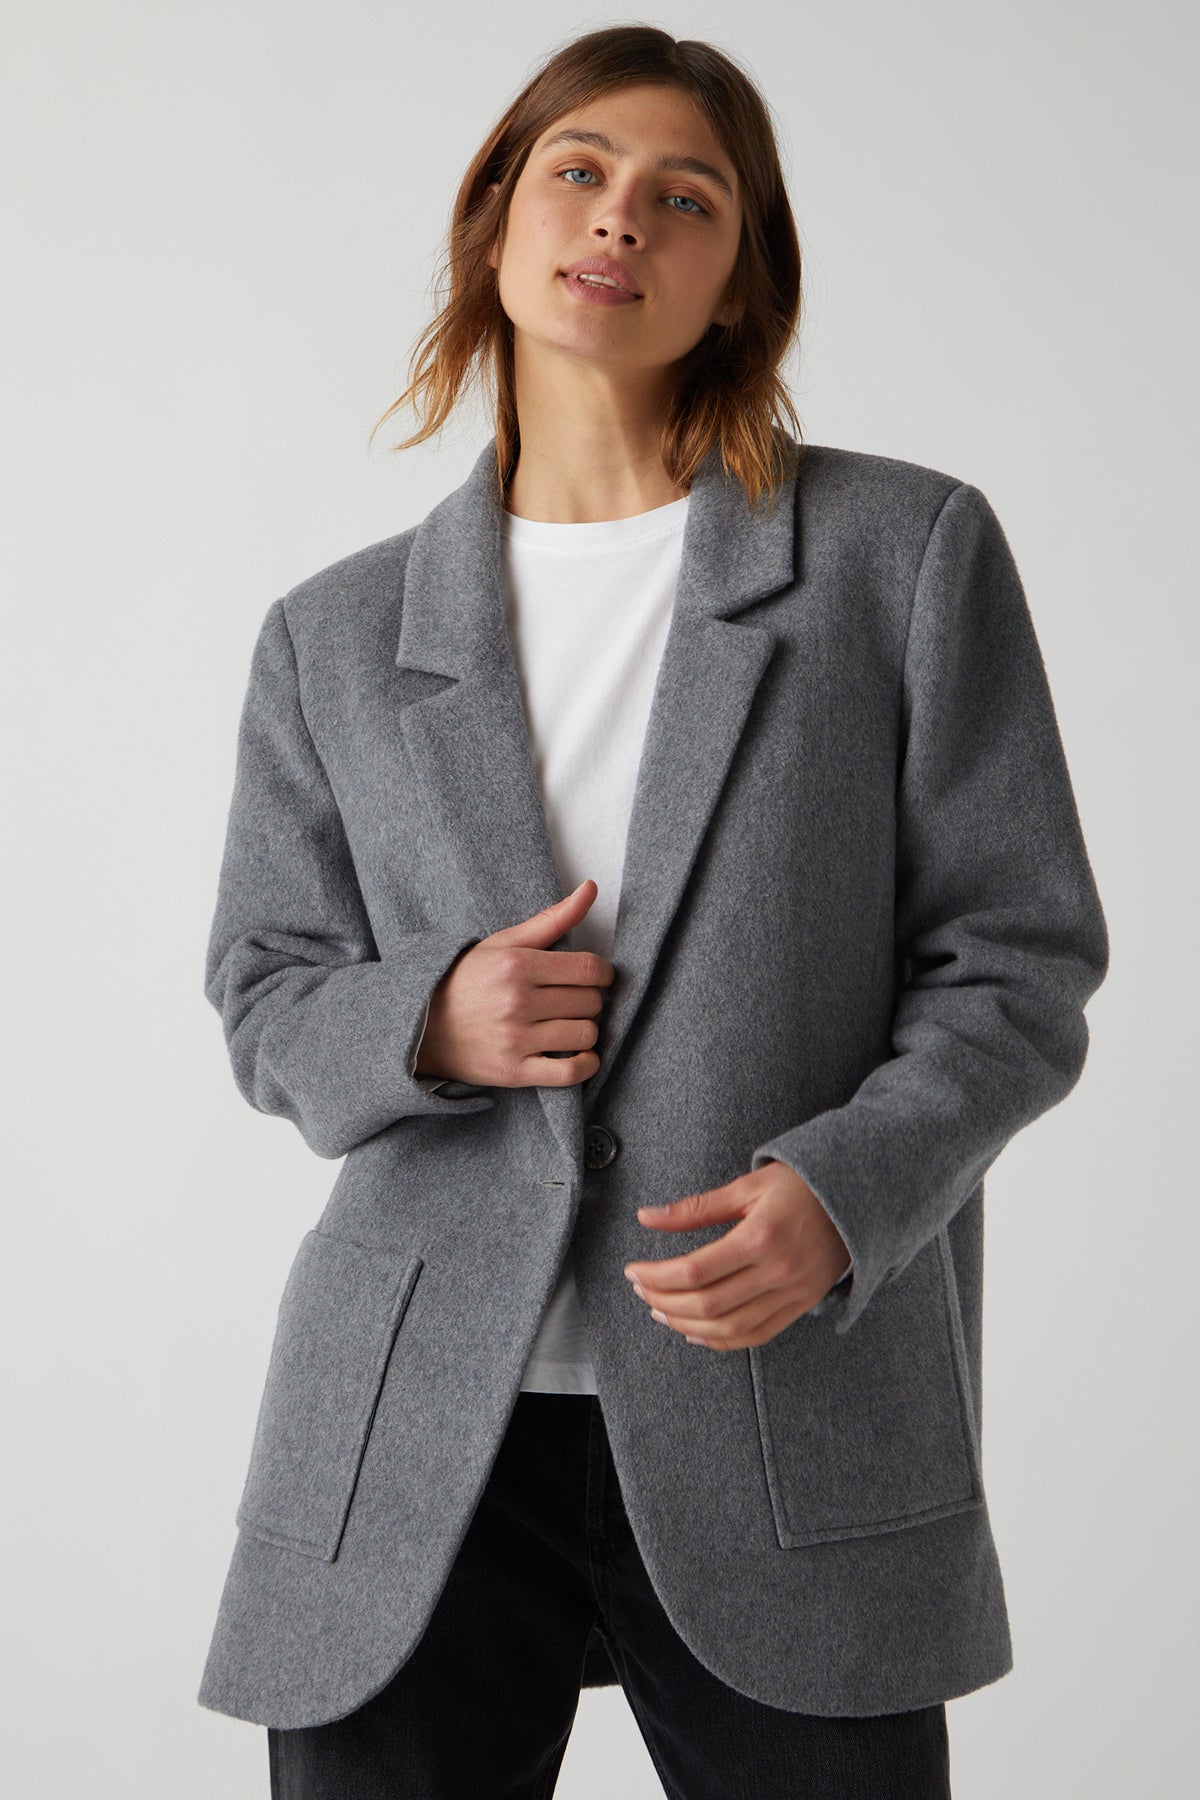   The model is wearing a grey wool ALAMOS BLAZER by Velvet by Jenny Graham. 